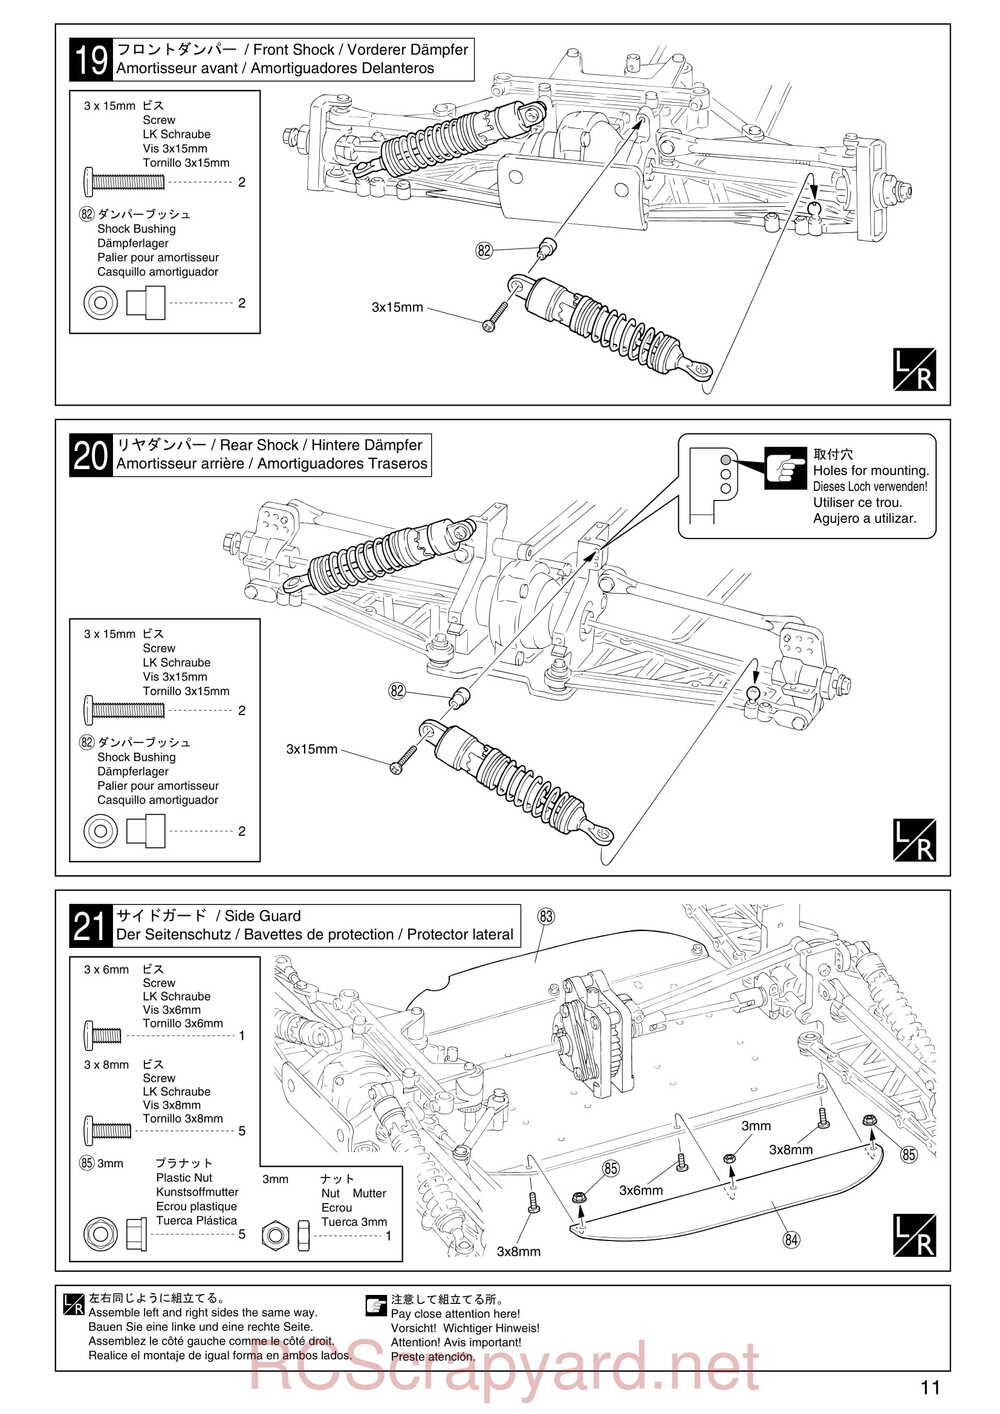 Kyosho - 31095 - TR-15 Stadium-Force - Manual - Page 11